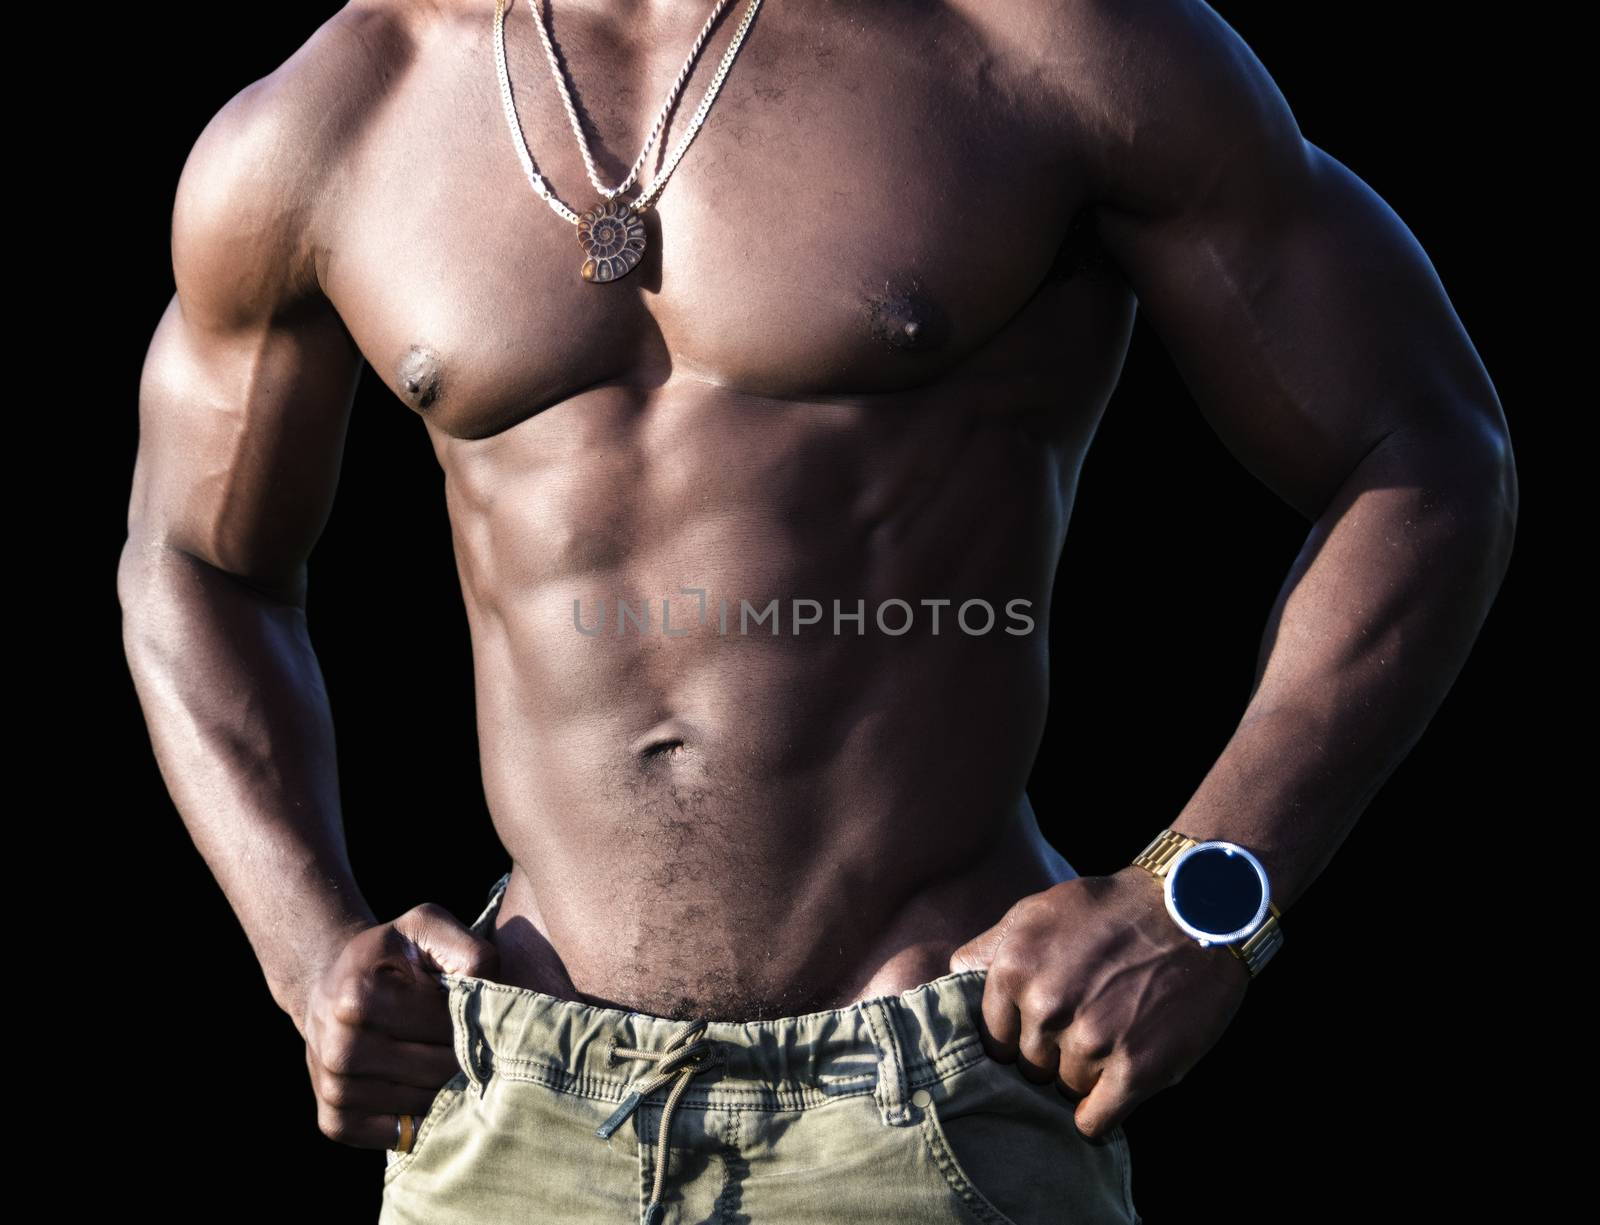 Torso of a Muscular African American Man by whitechild